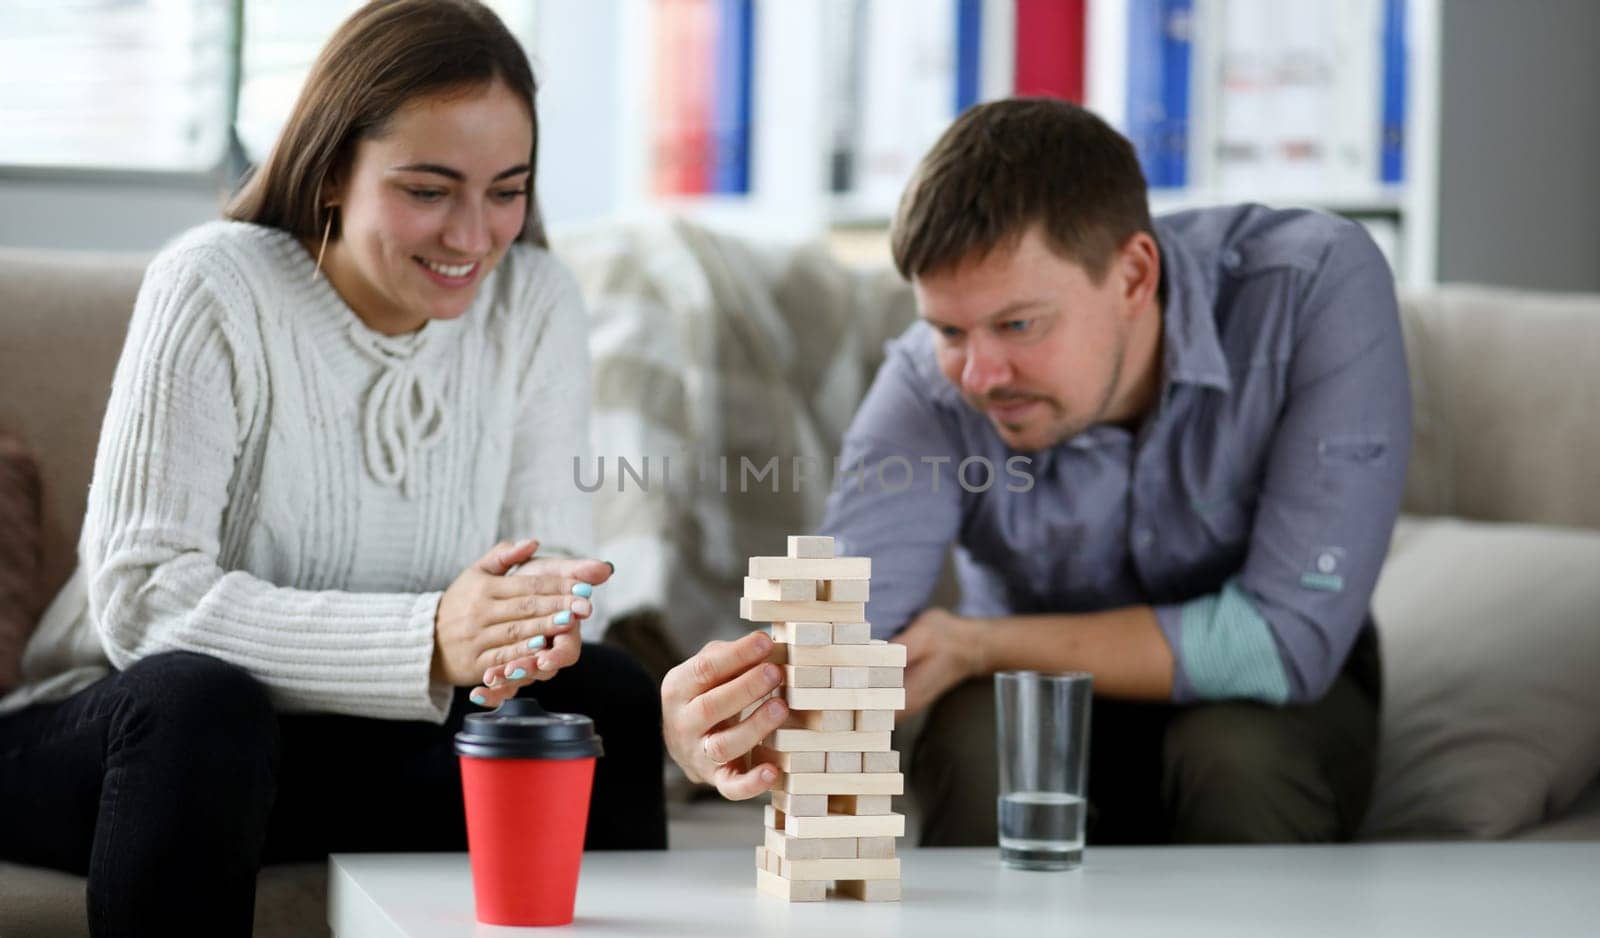 Wife and husbland play in board game. Couple build tower from wood block. Party entertainment concept.